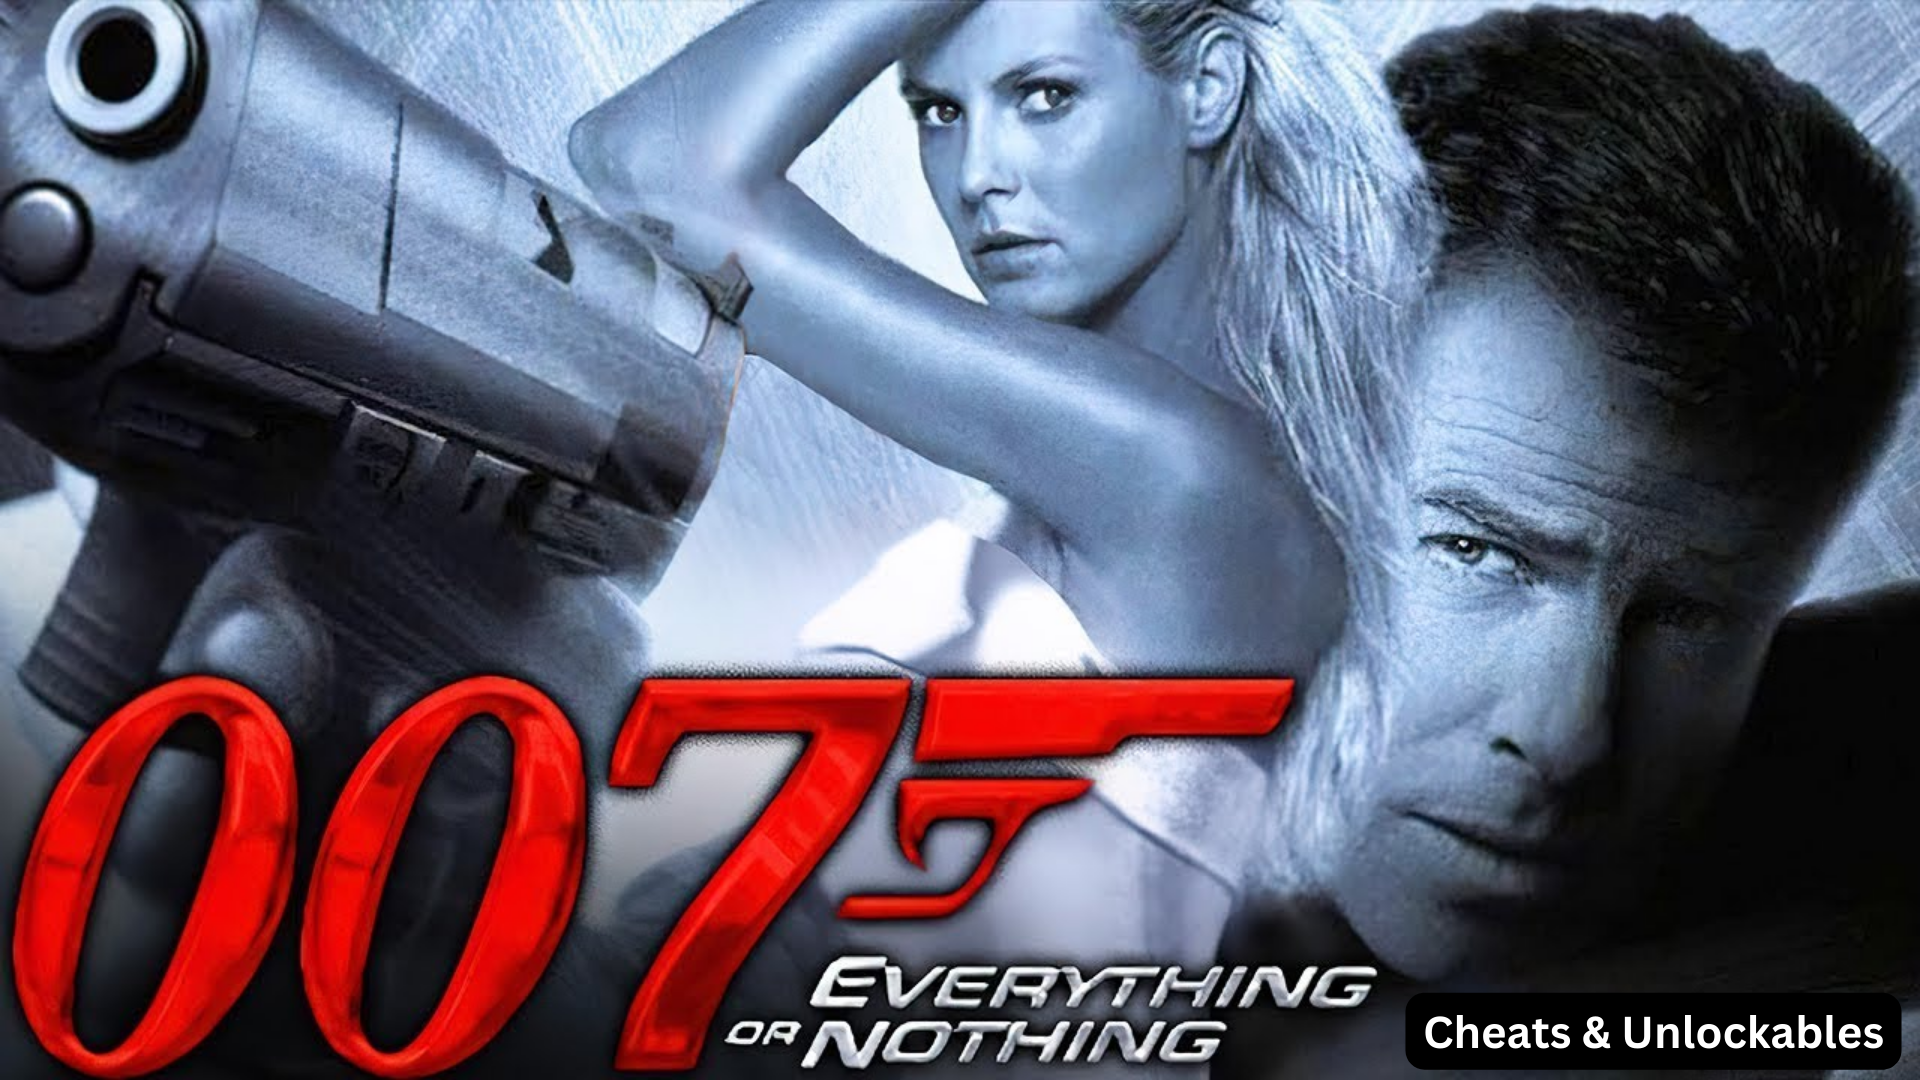 james bond 007: everything or nothing cheats and unlockables